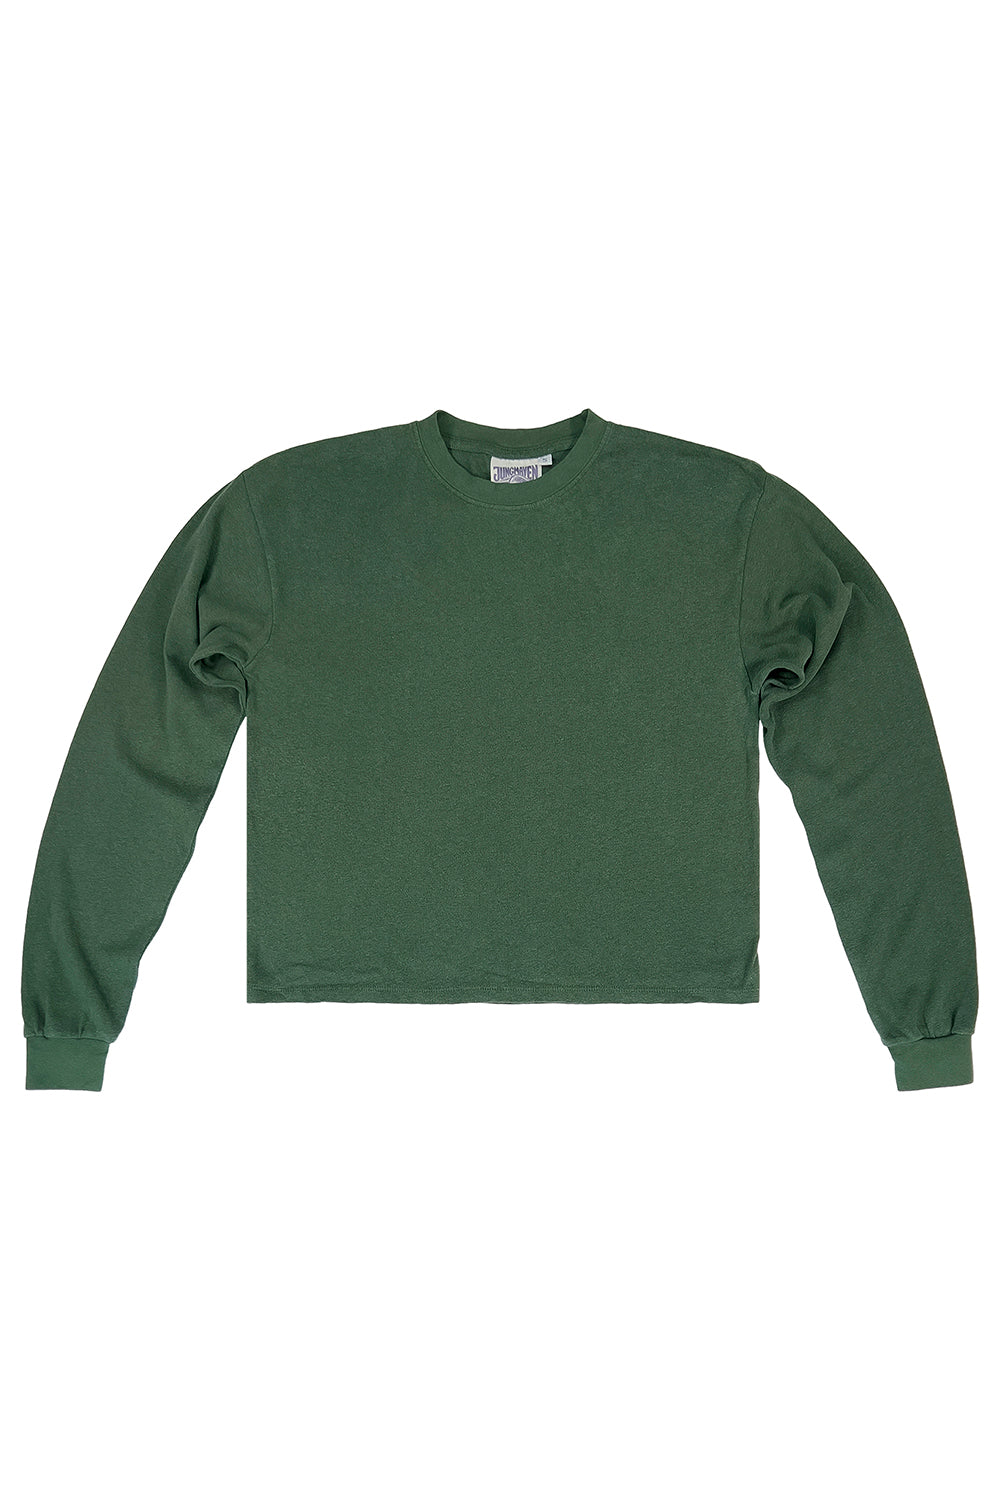 Cropped Long Sleeve Tee | Jungmaven Hemp Clothing & Accessories / Color: Hunter Green